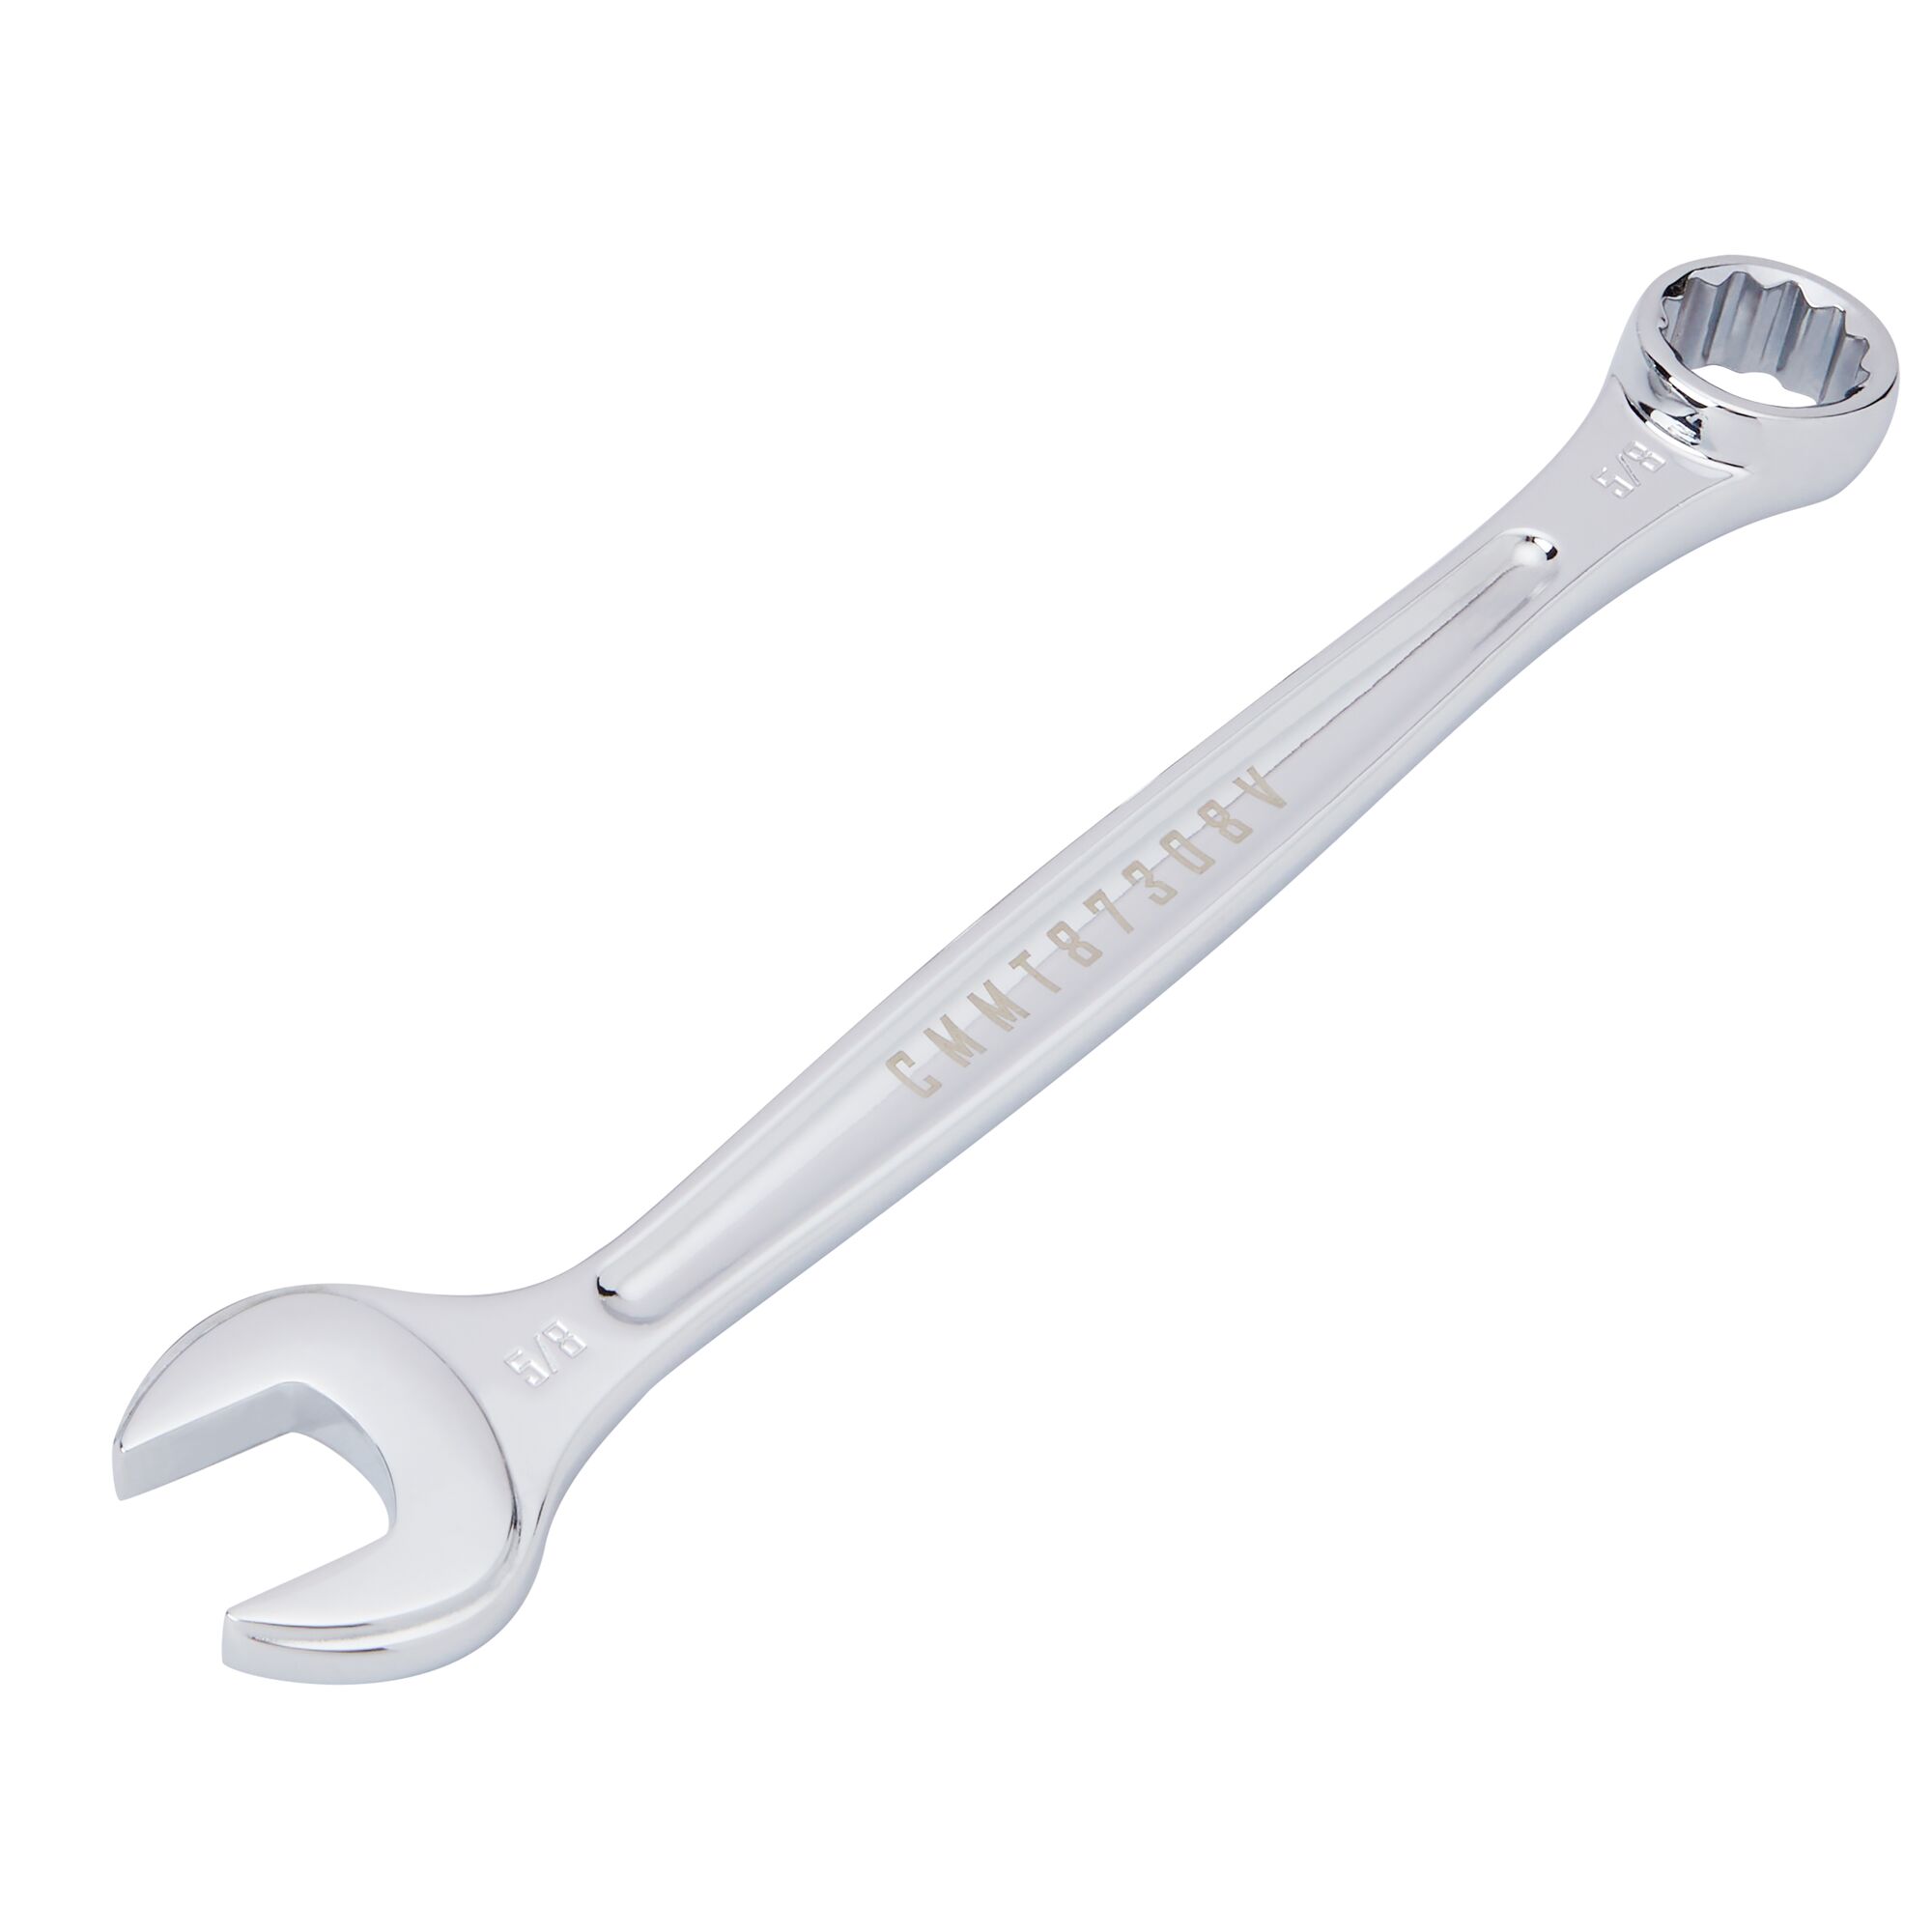 CRAFTSMAN V-SERIES Combo Wrench 5/8 